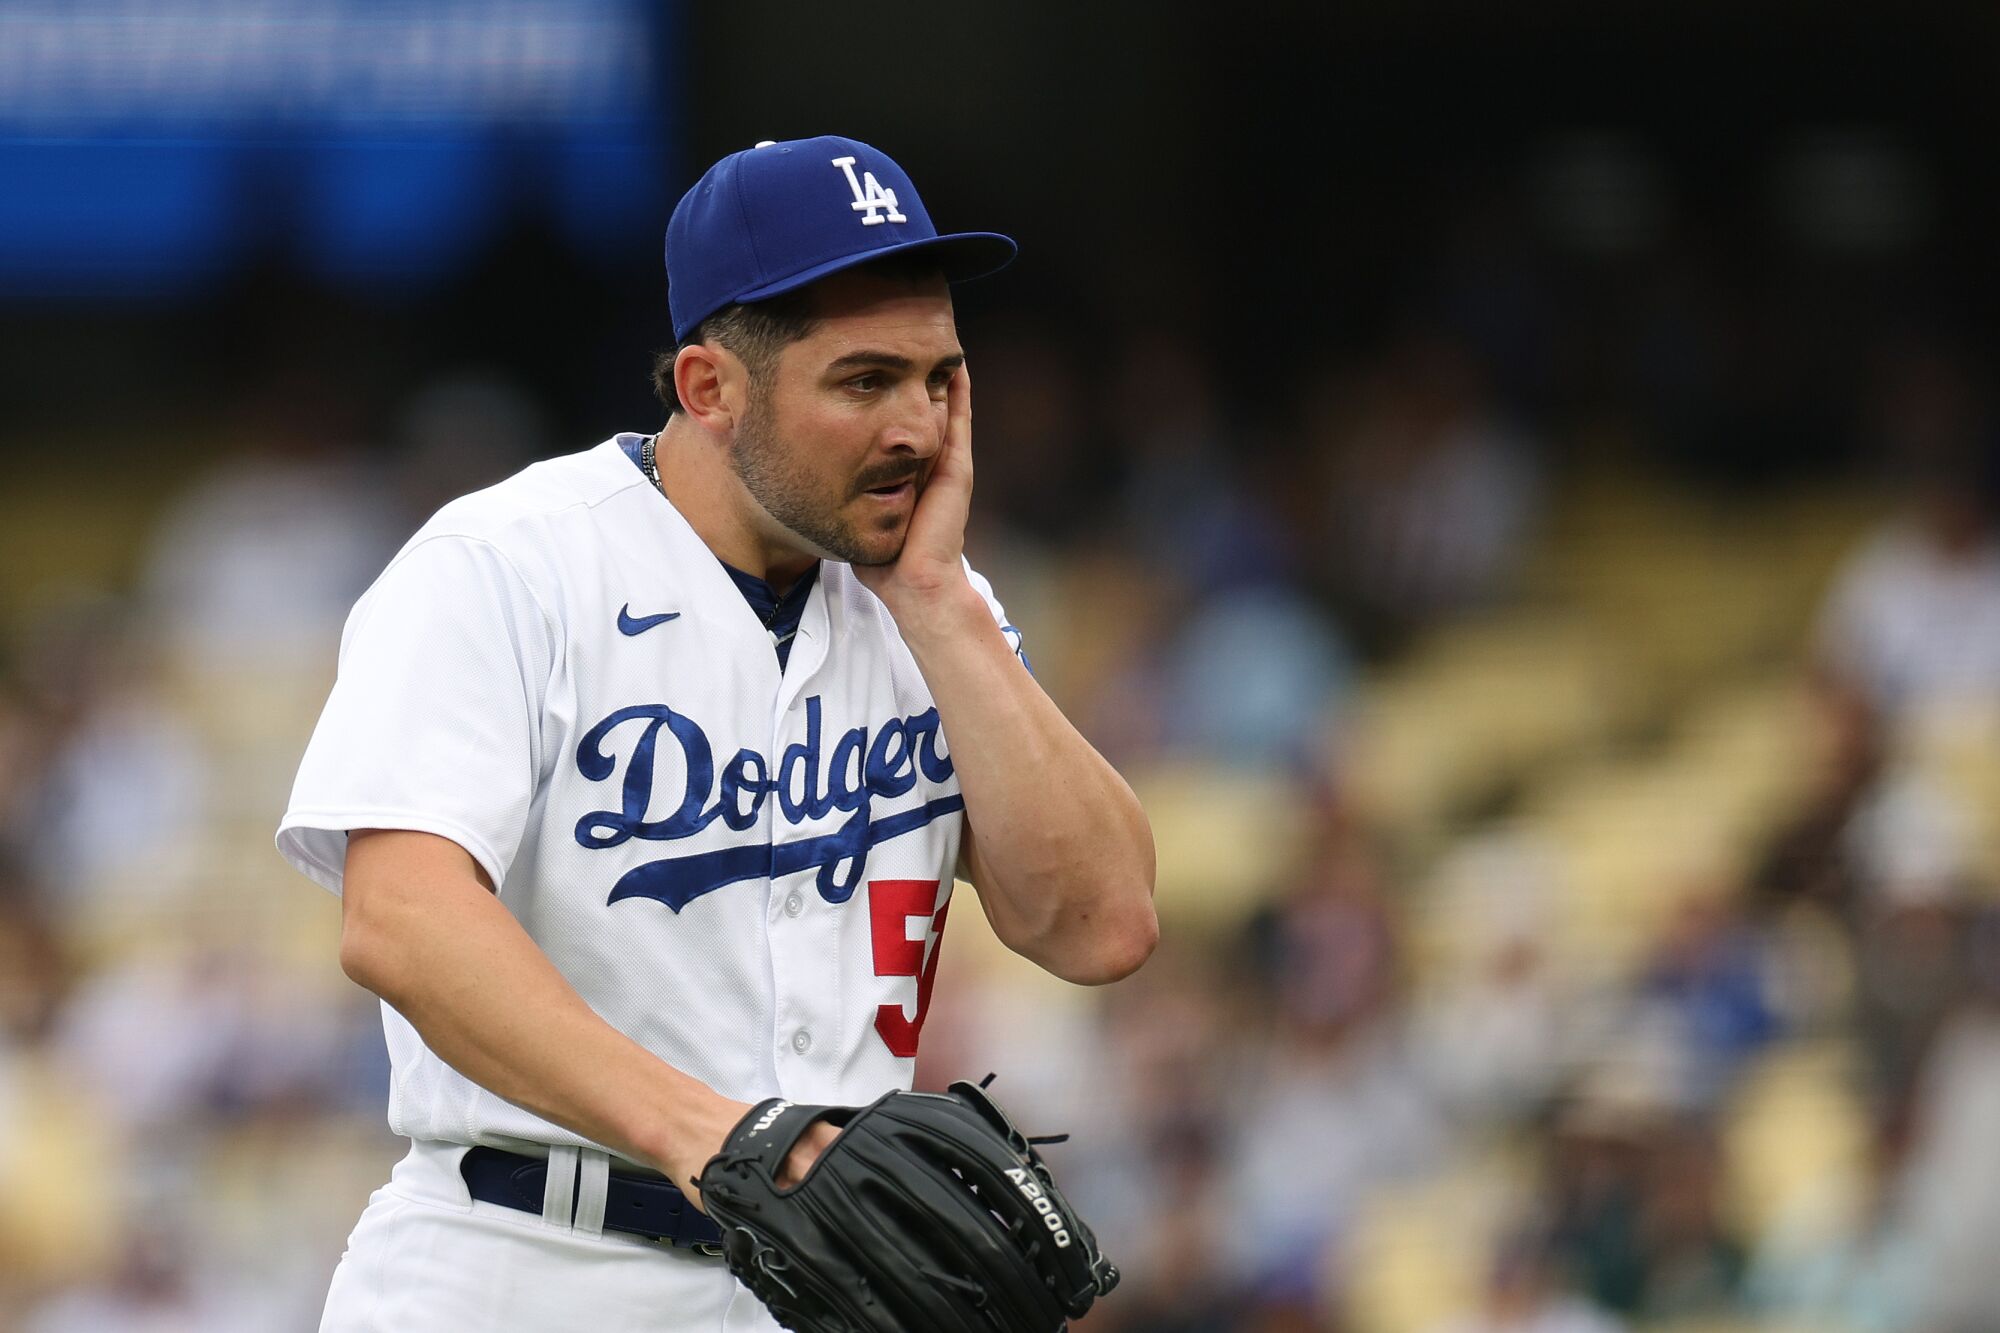 Dodgers reliever Alex Vesia walks to the dugout during a loss to the Washington Nationals on May 31.